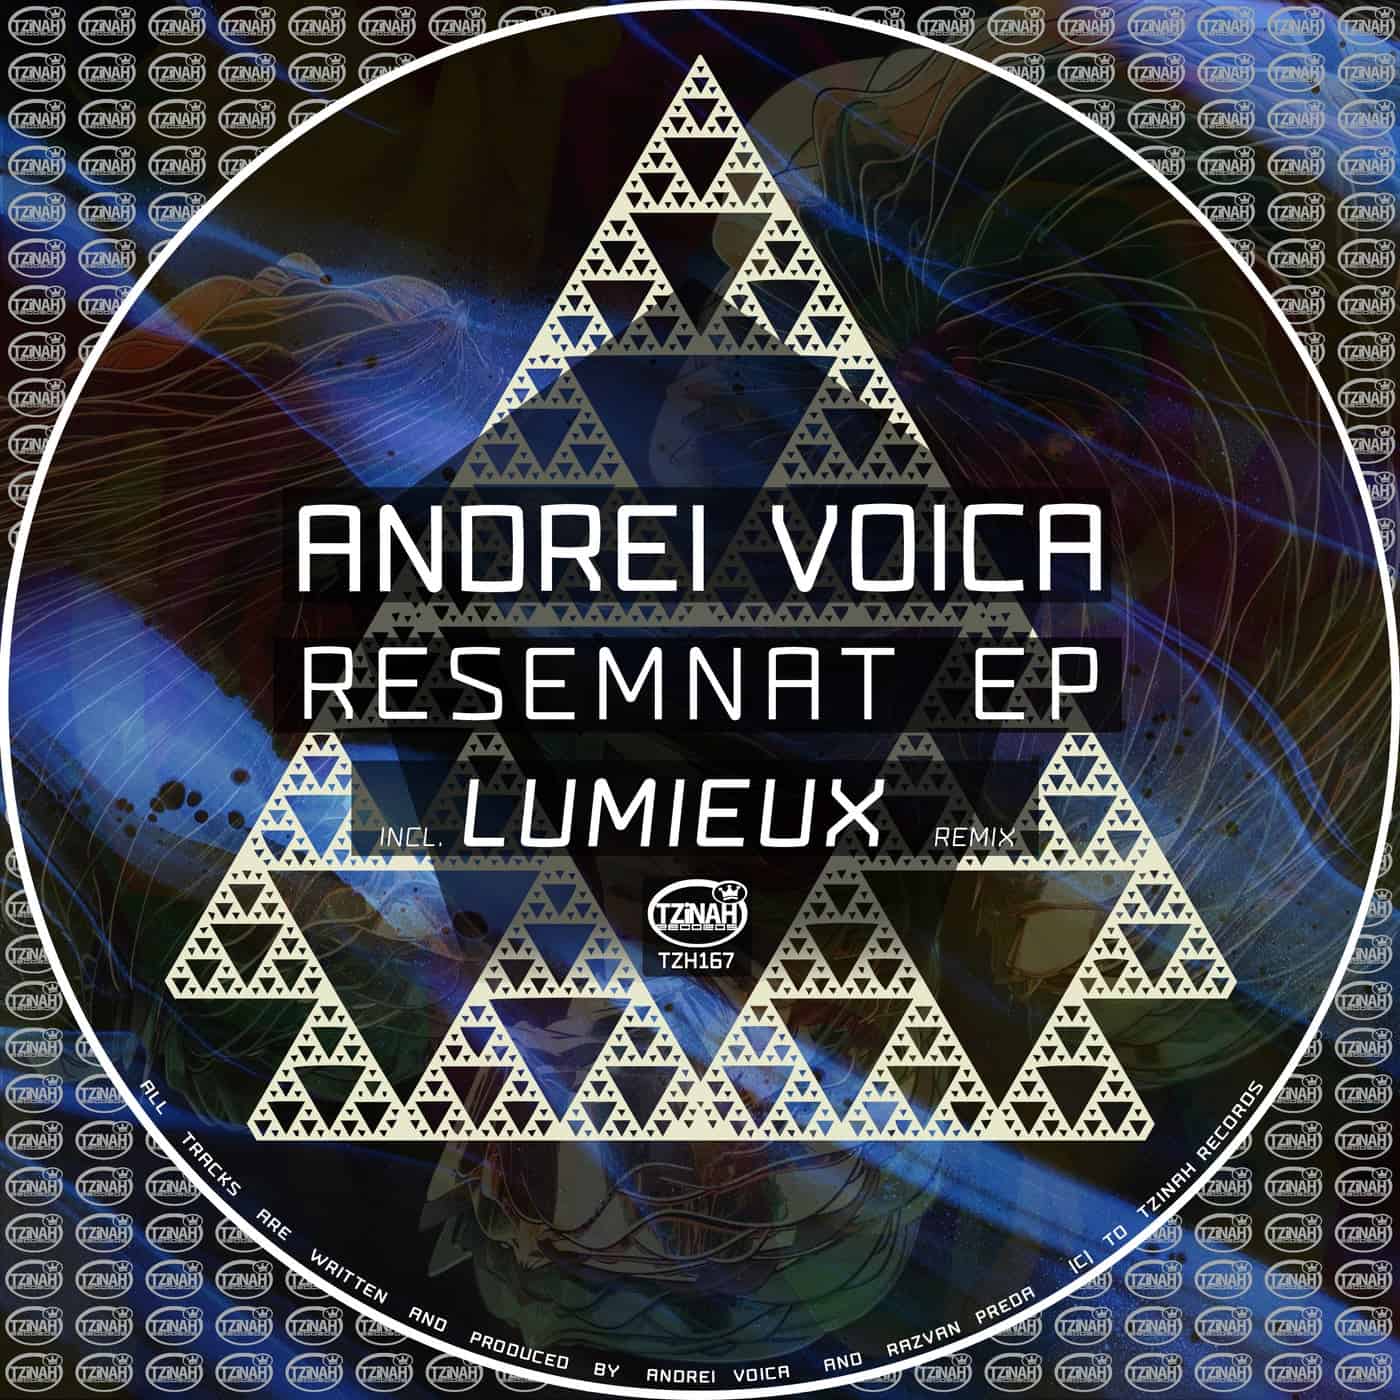 image cover: Andrei Voica - Resemnat EP / TZH167